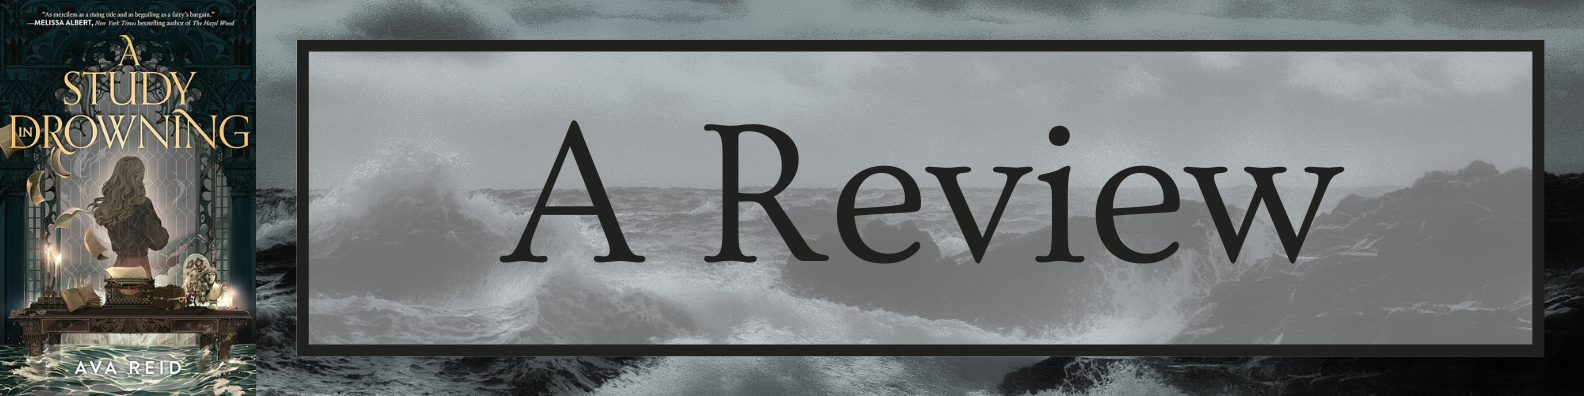 A Study in Drowning by Ava Reid – A Review